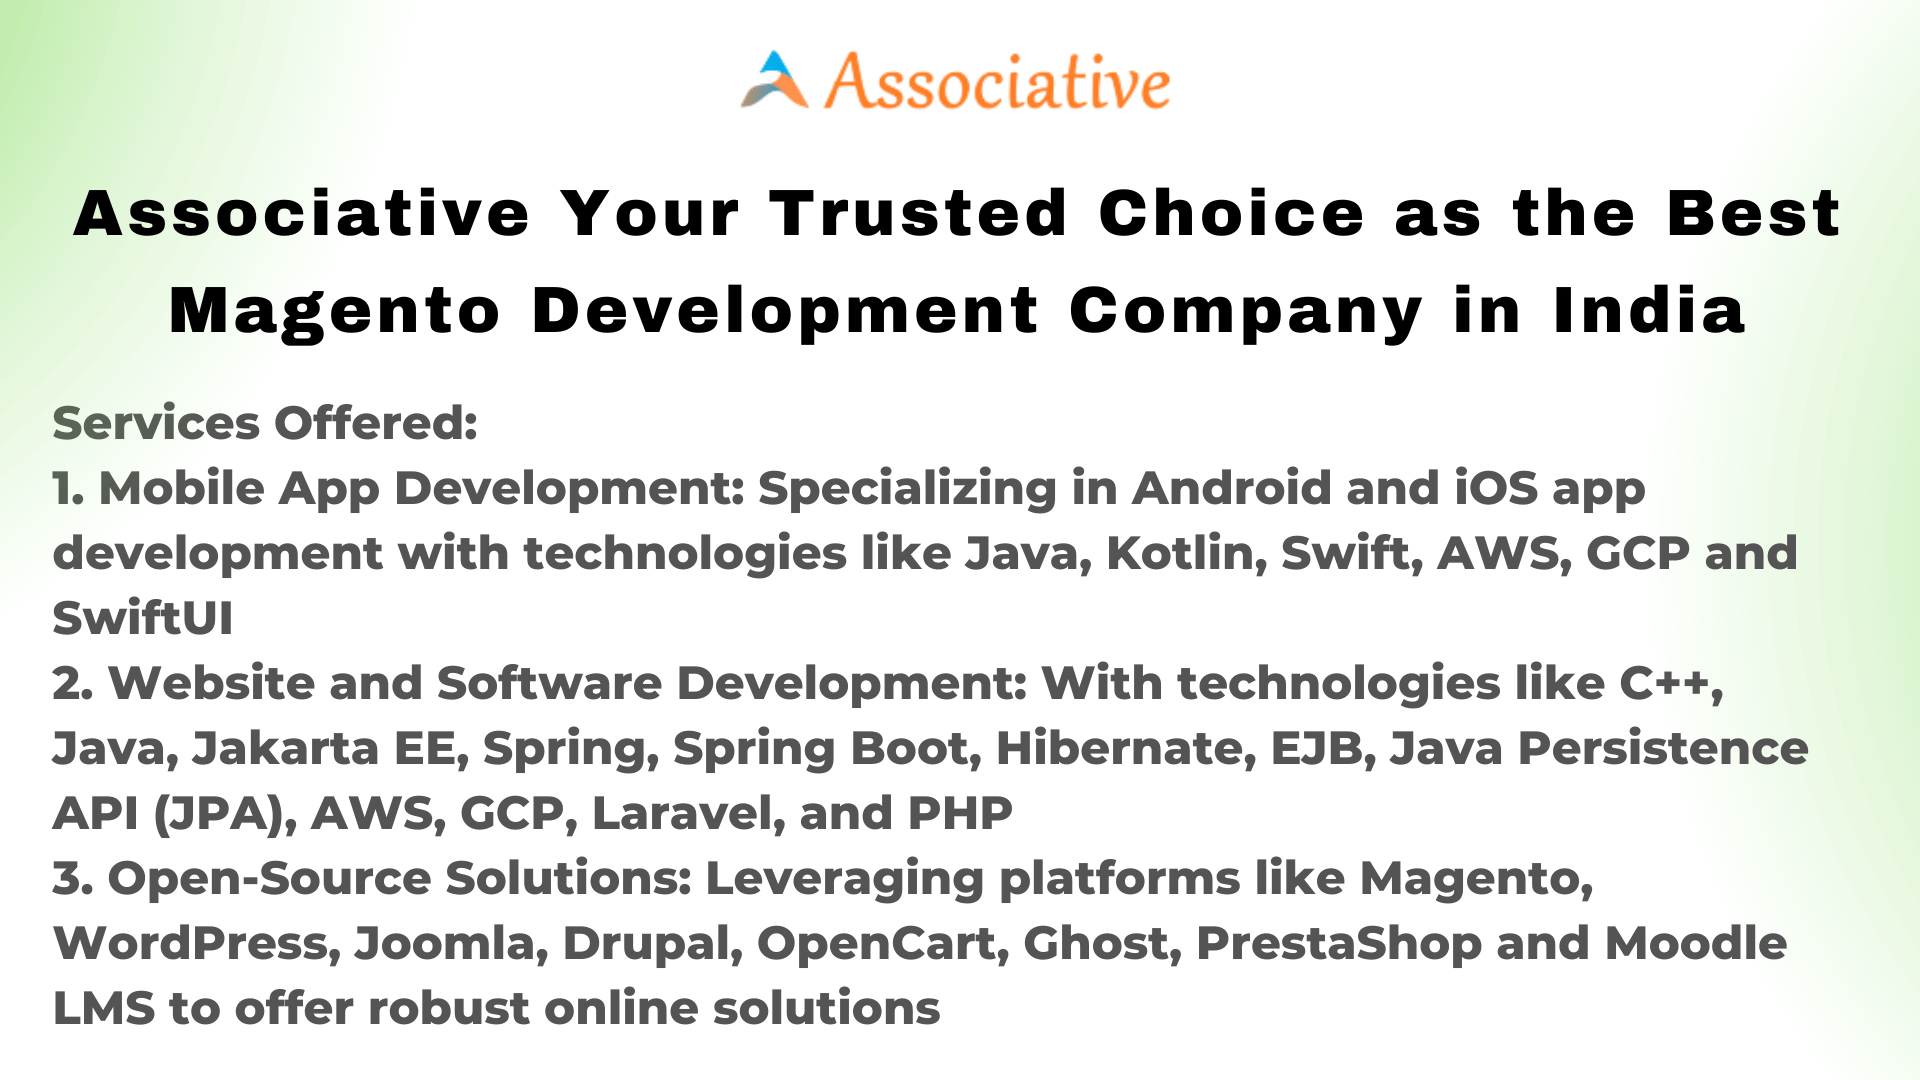 Associative Your Trusted Choice as the Best Magento Development Company in India